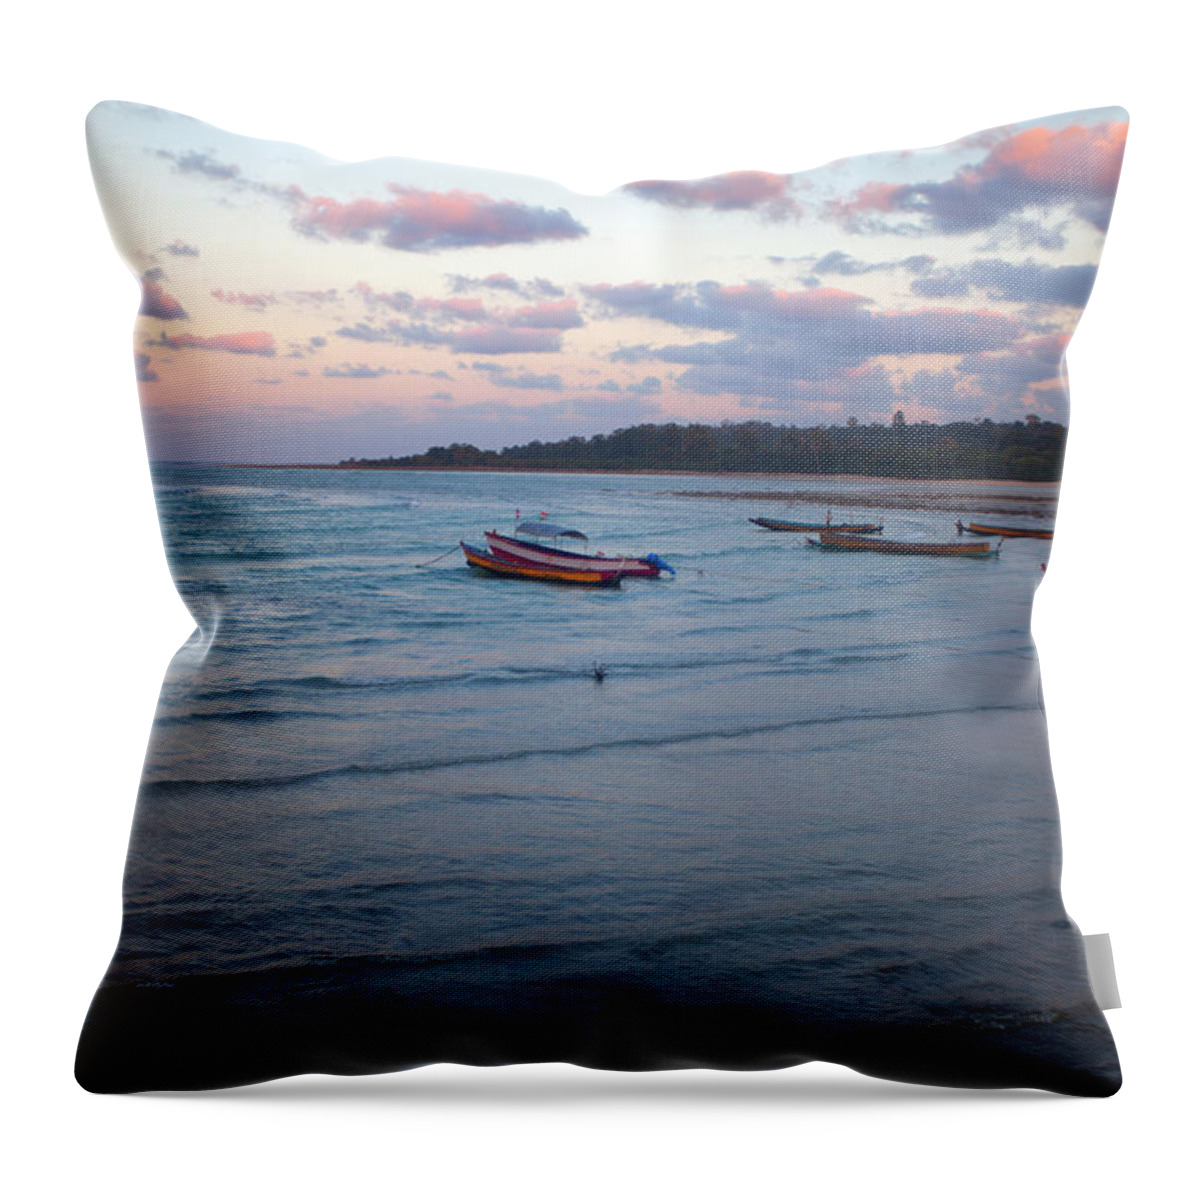 Scenics Throw Pillow featuring the photograph Small Boats Floating,bharatpur #1 by Partha Pal